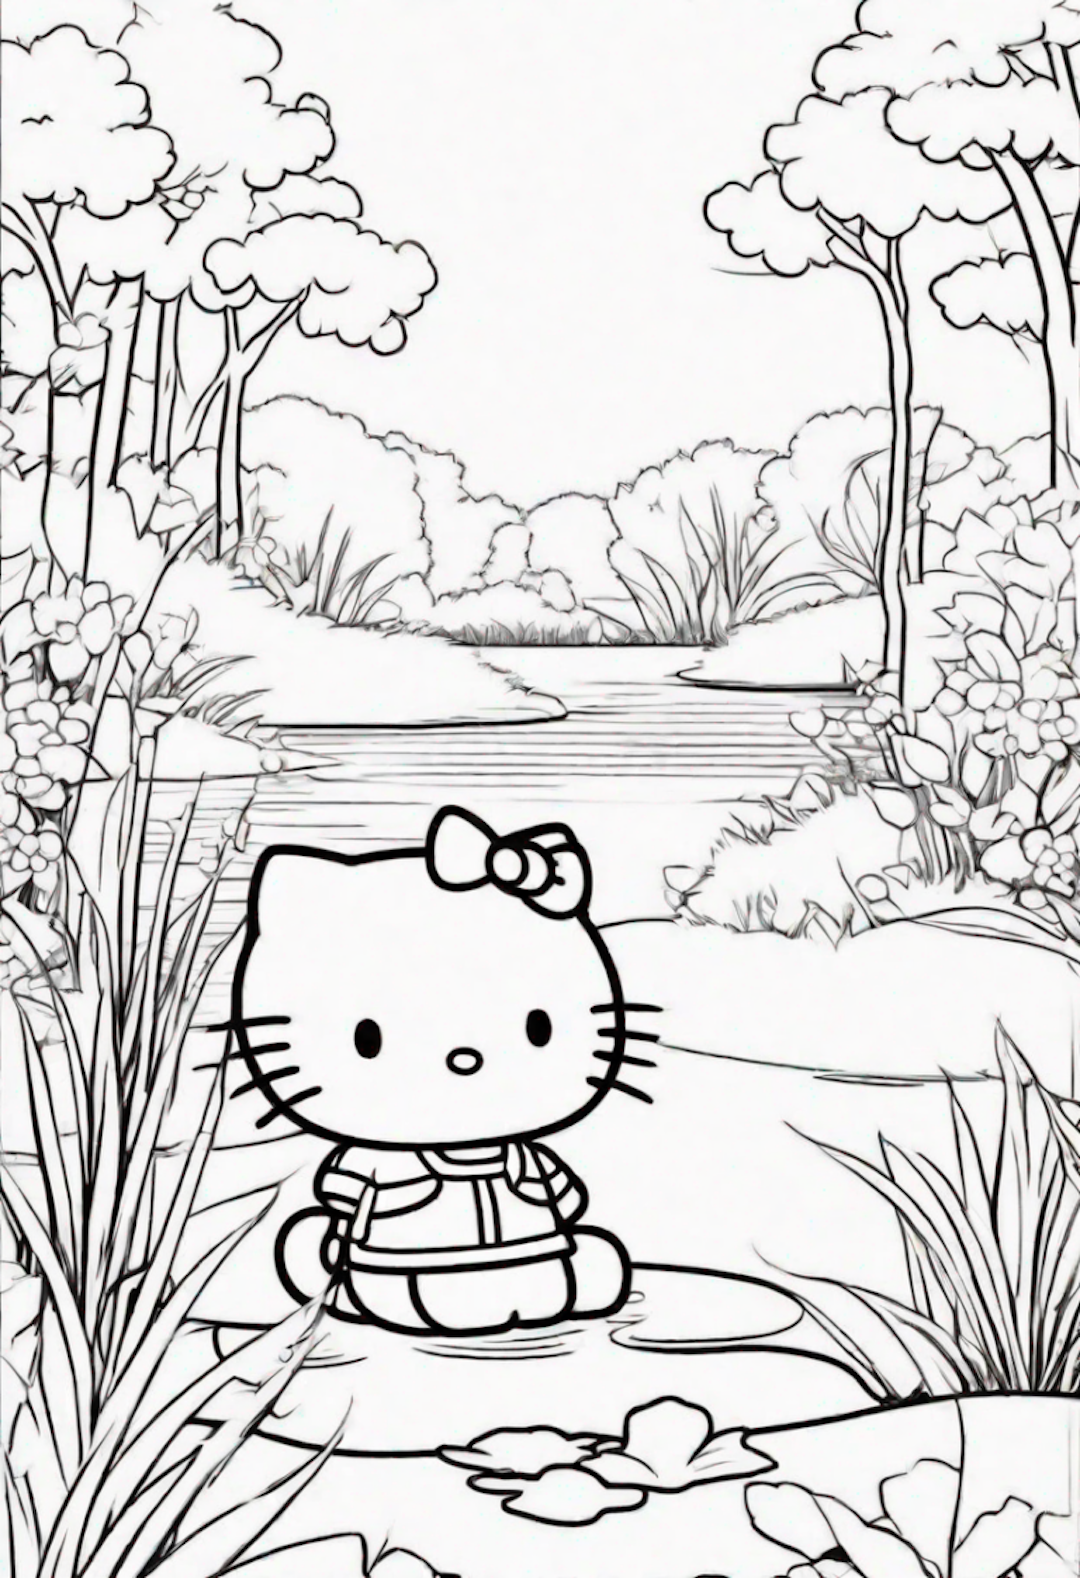 Hello Kitty at a Pond coloring pages